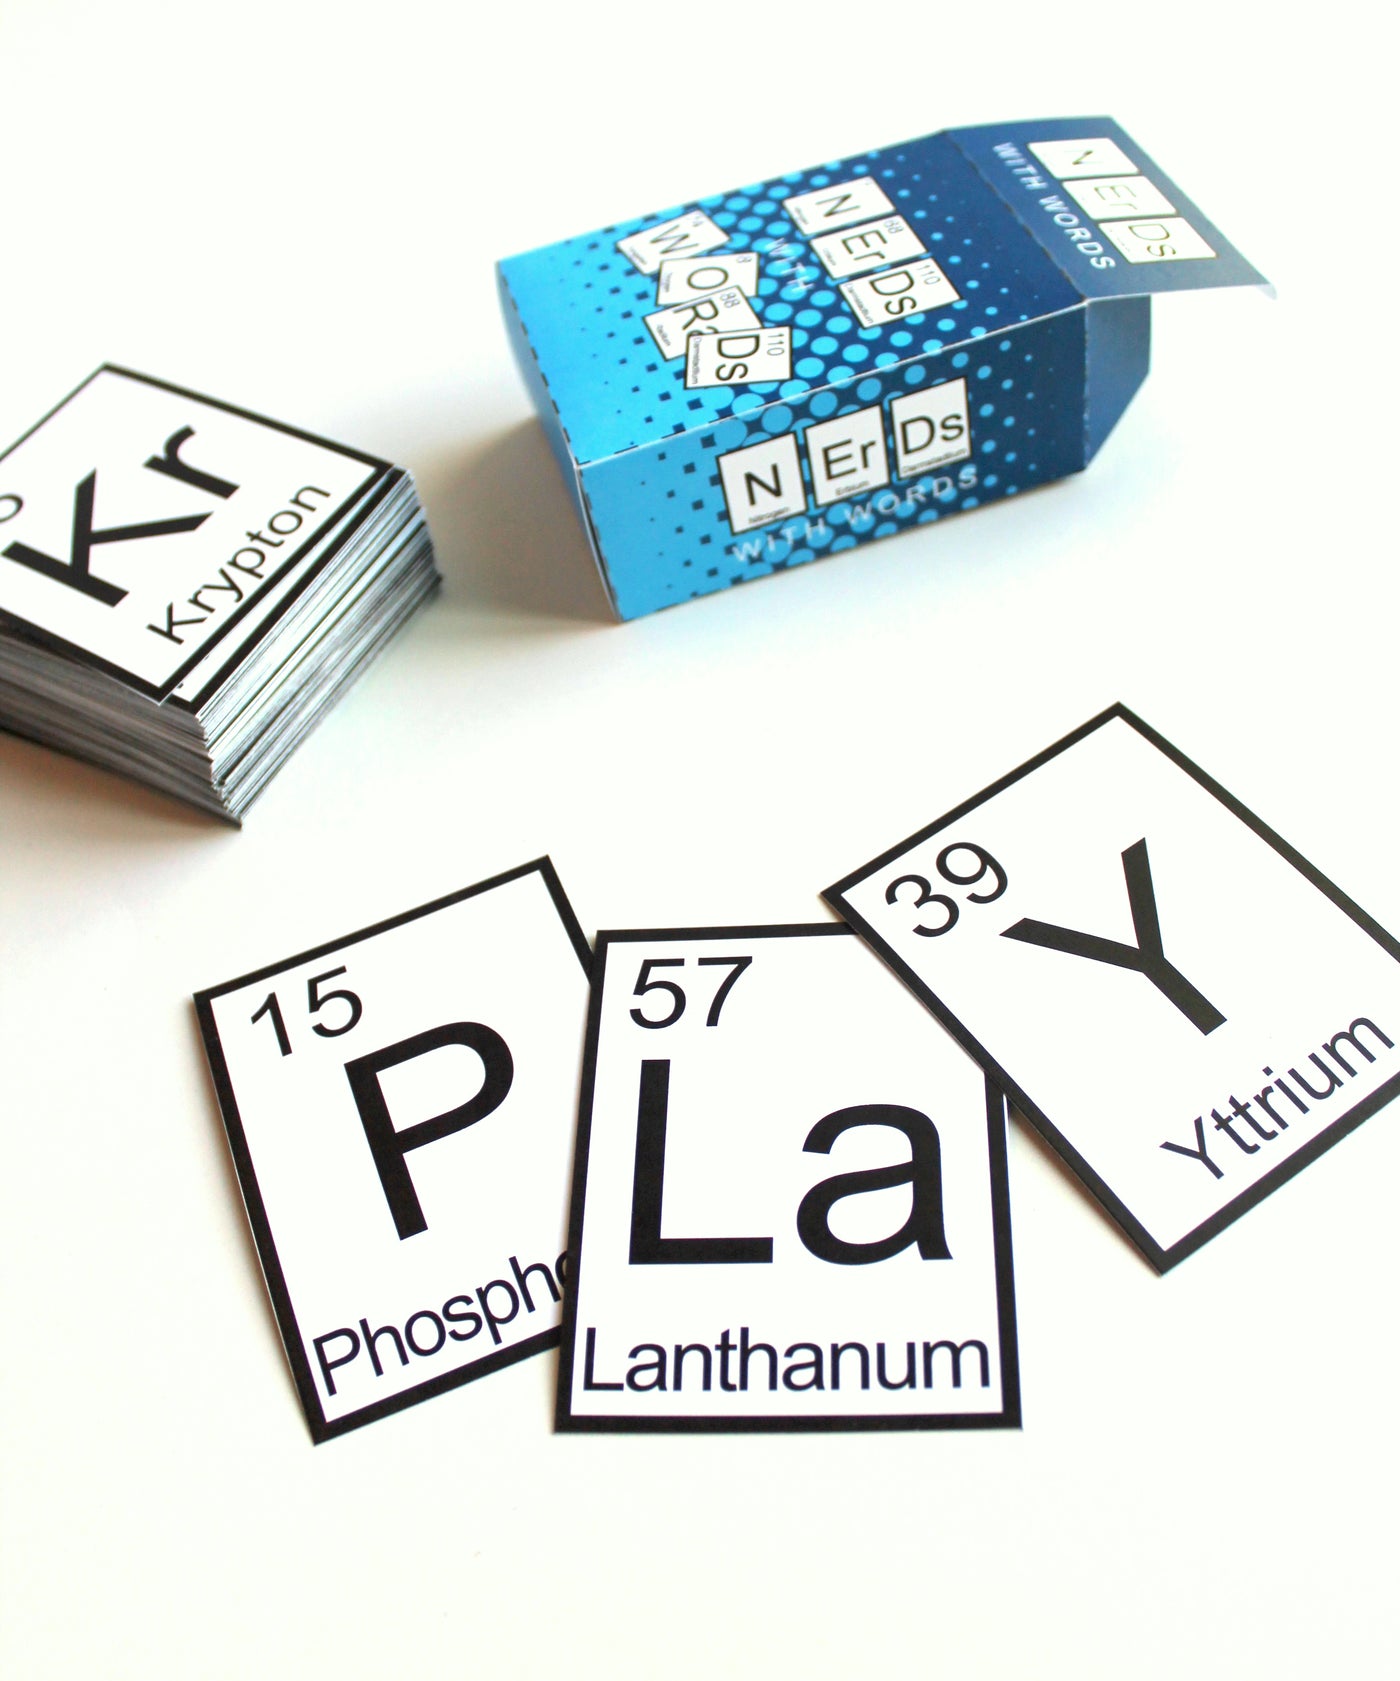 A stack of cards. Each has a different periodic element. Three cards are fanned out to spell "PLaY." The card box is blue and says "Nerds with Words."